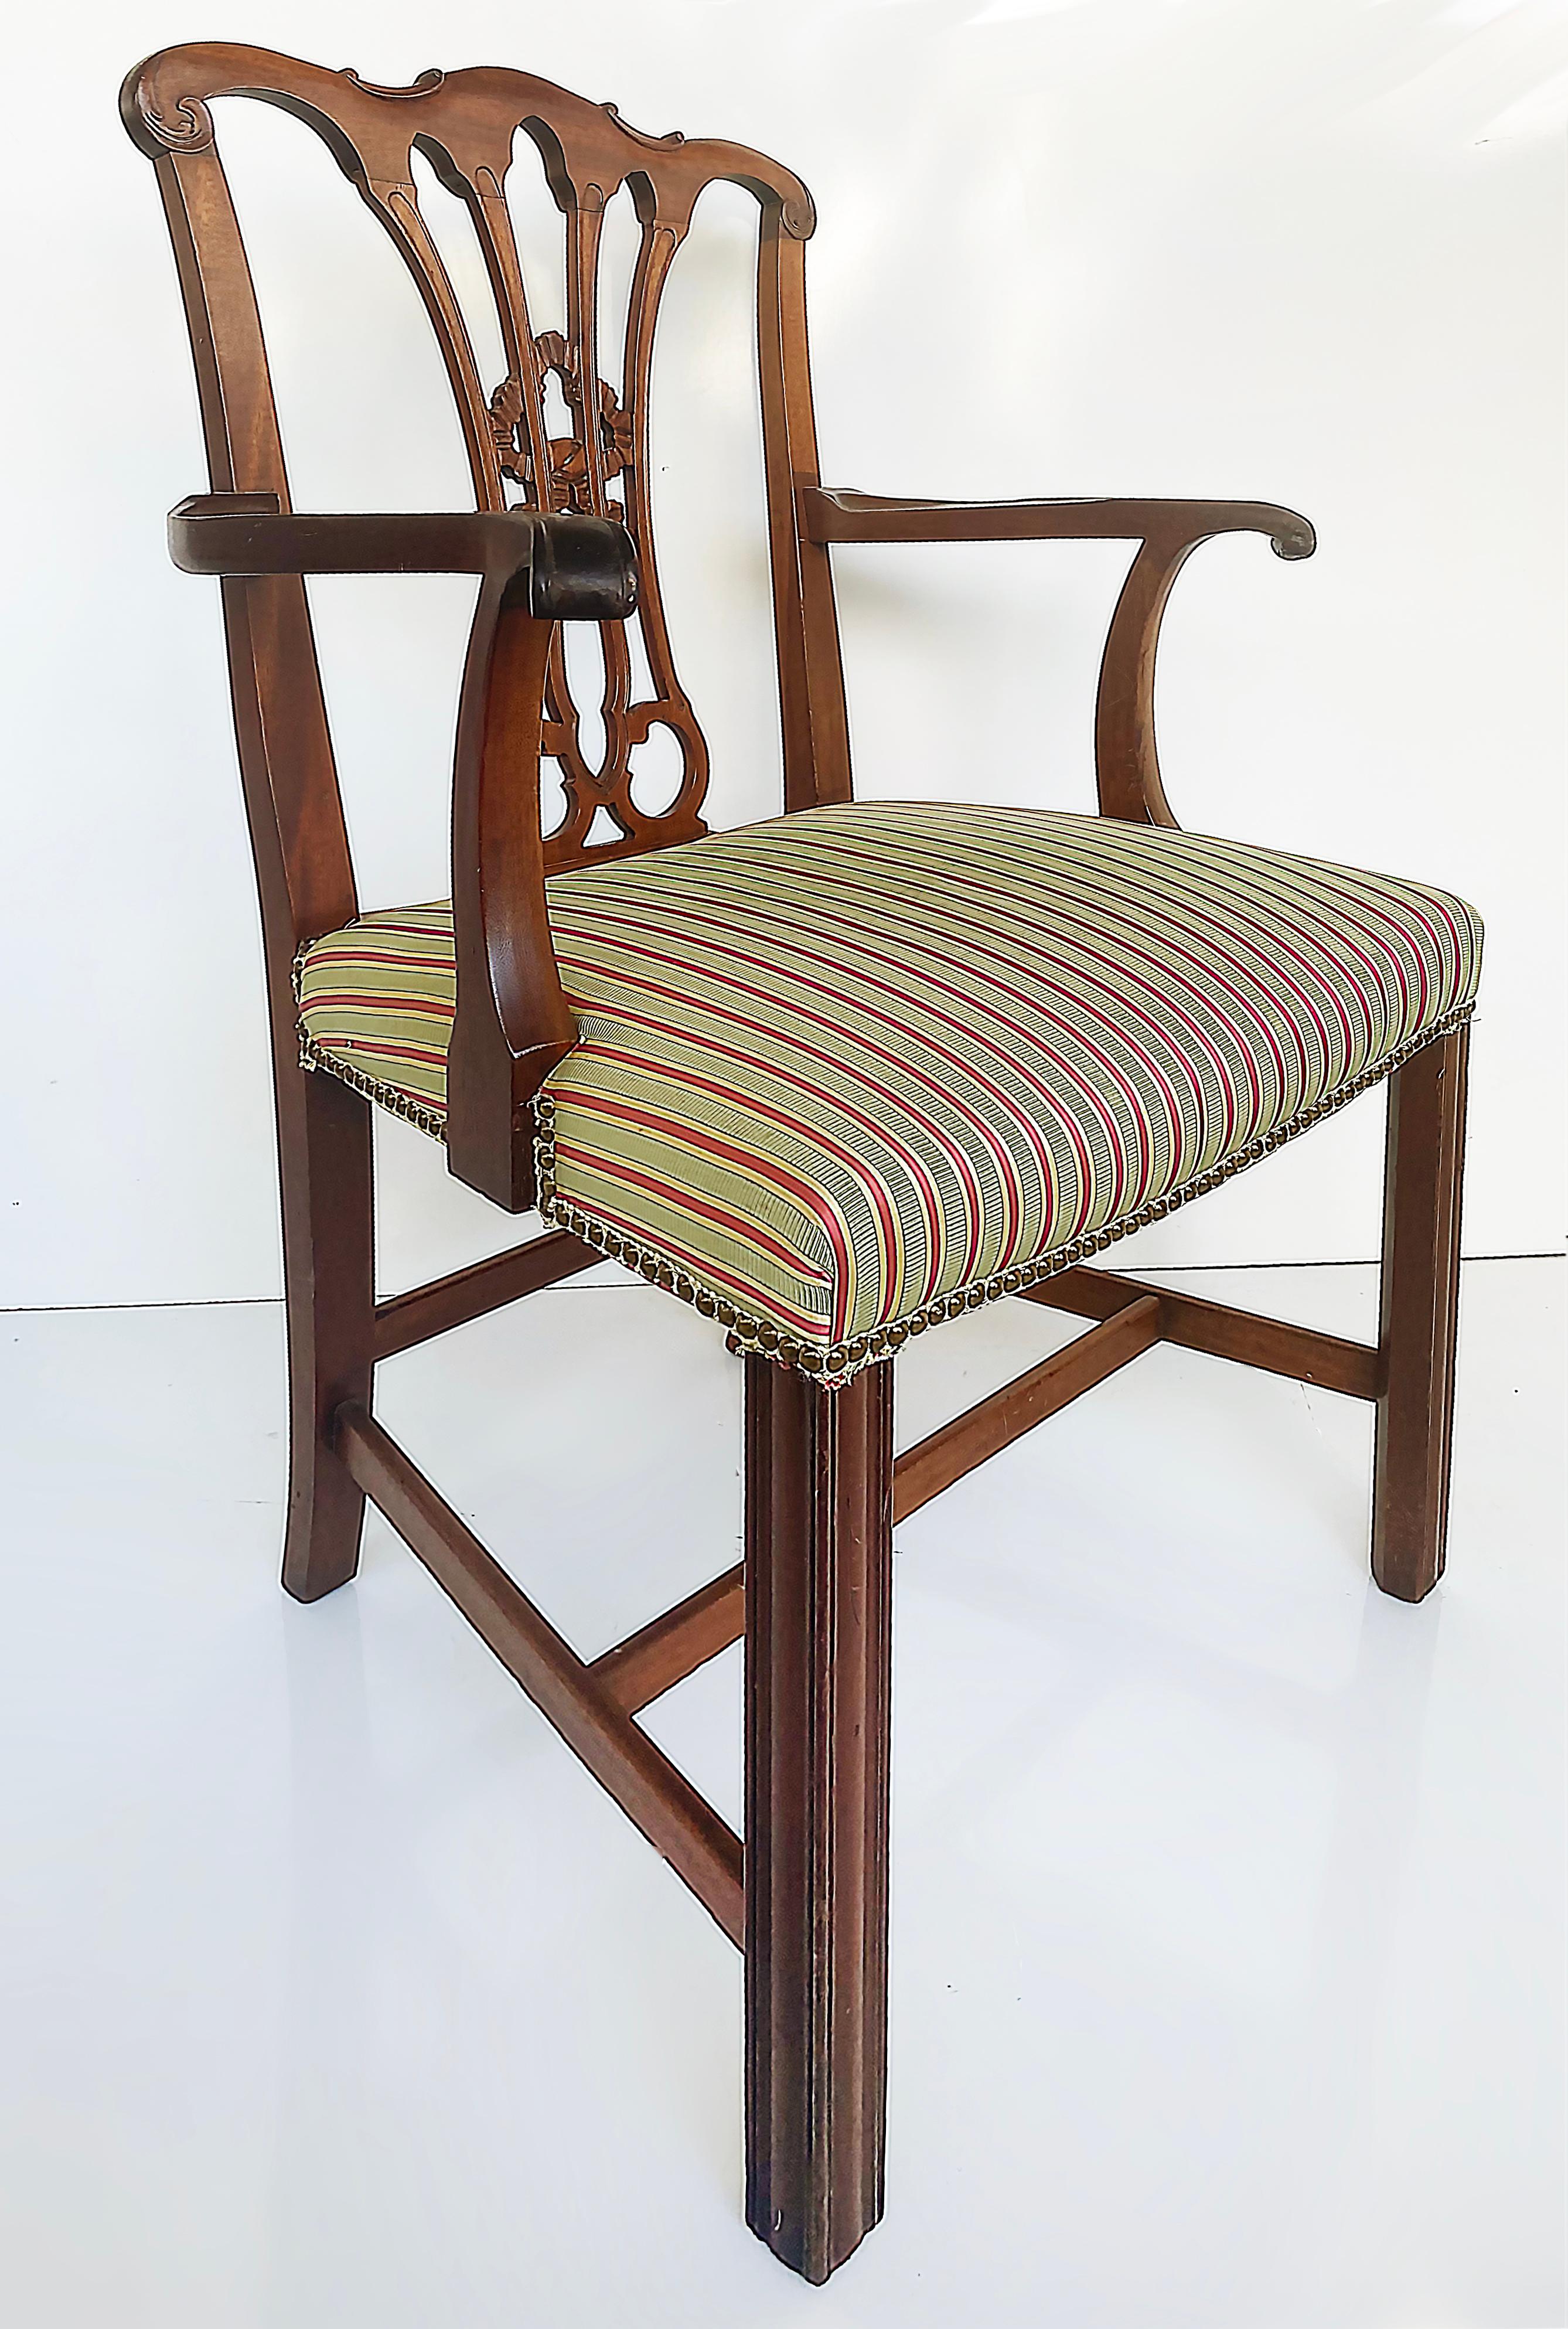 Chippendale style mahogany slat back armchair with upholstered seat cushion

Offered for sale is a Chippendale style mahogany armchair with a slat back, upholstered seat cushion with striped fabric, and brass metal nail head detailing. The legs